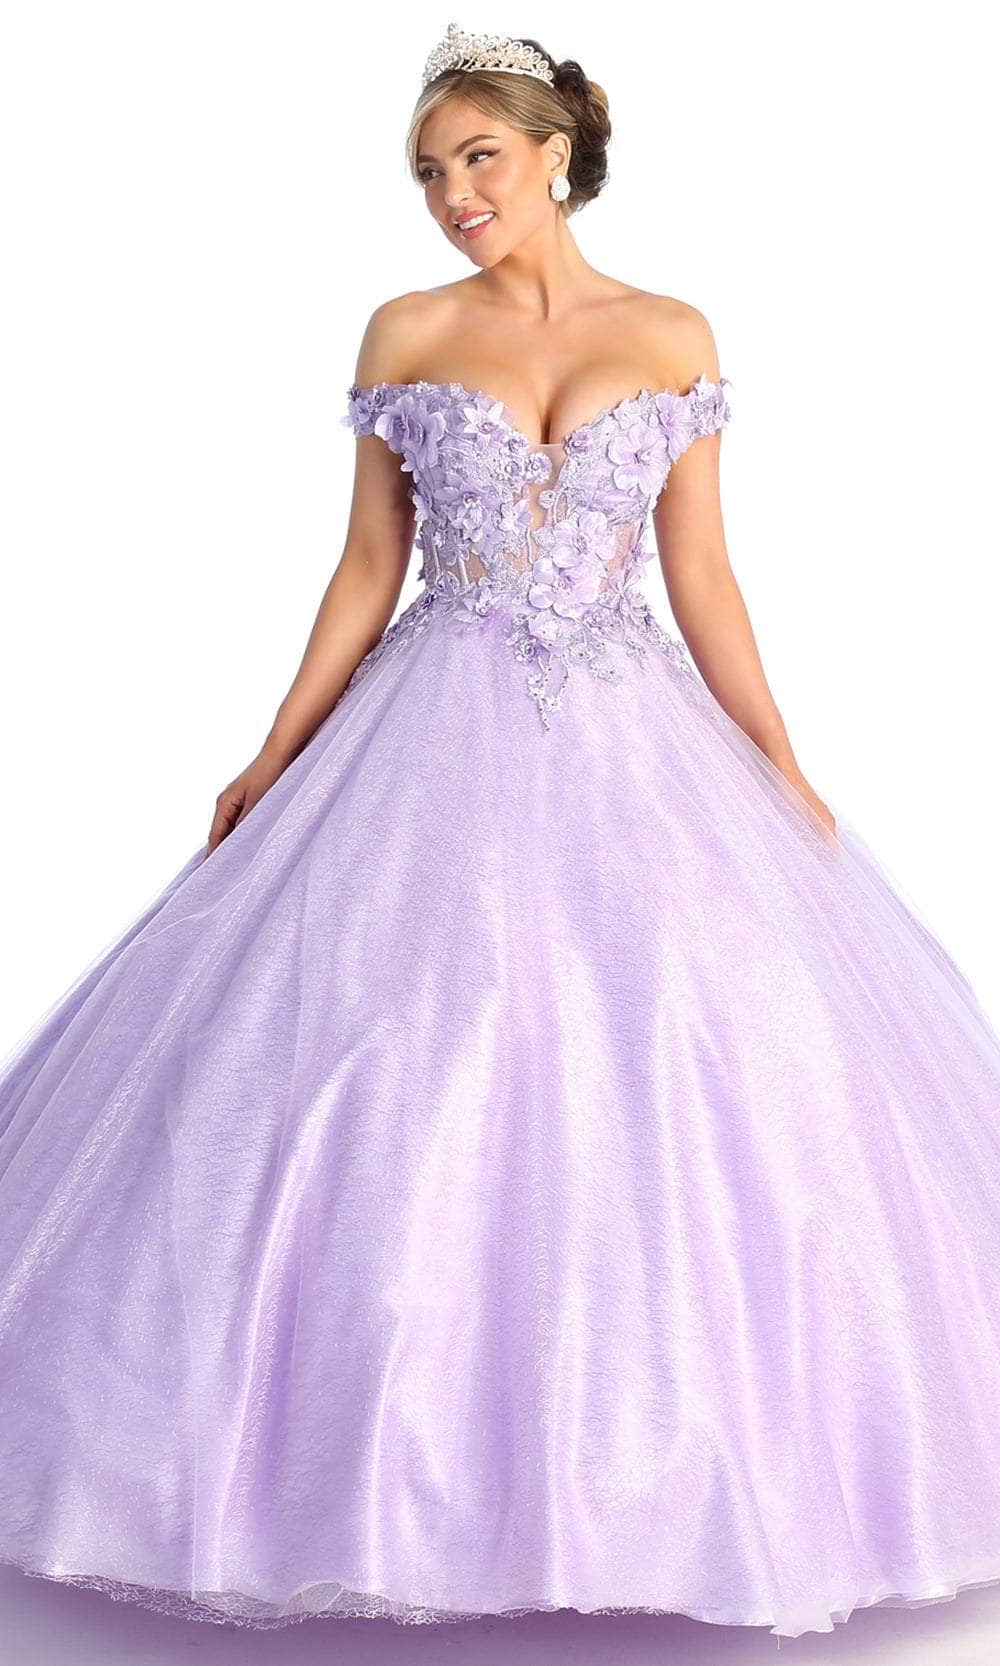 May Queen LK166 - Off Shoulder Applique Prom Ballgown Ball Gowns 2 / Lilac